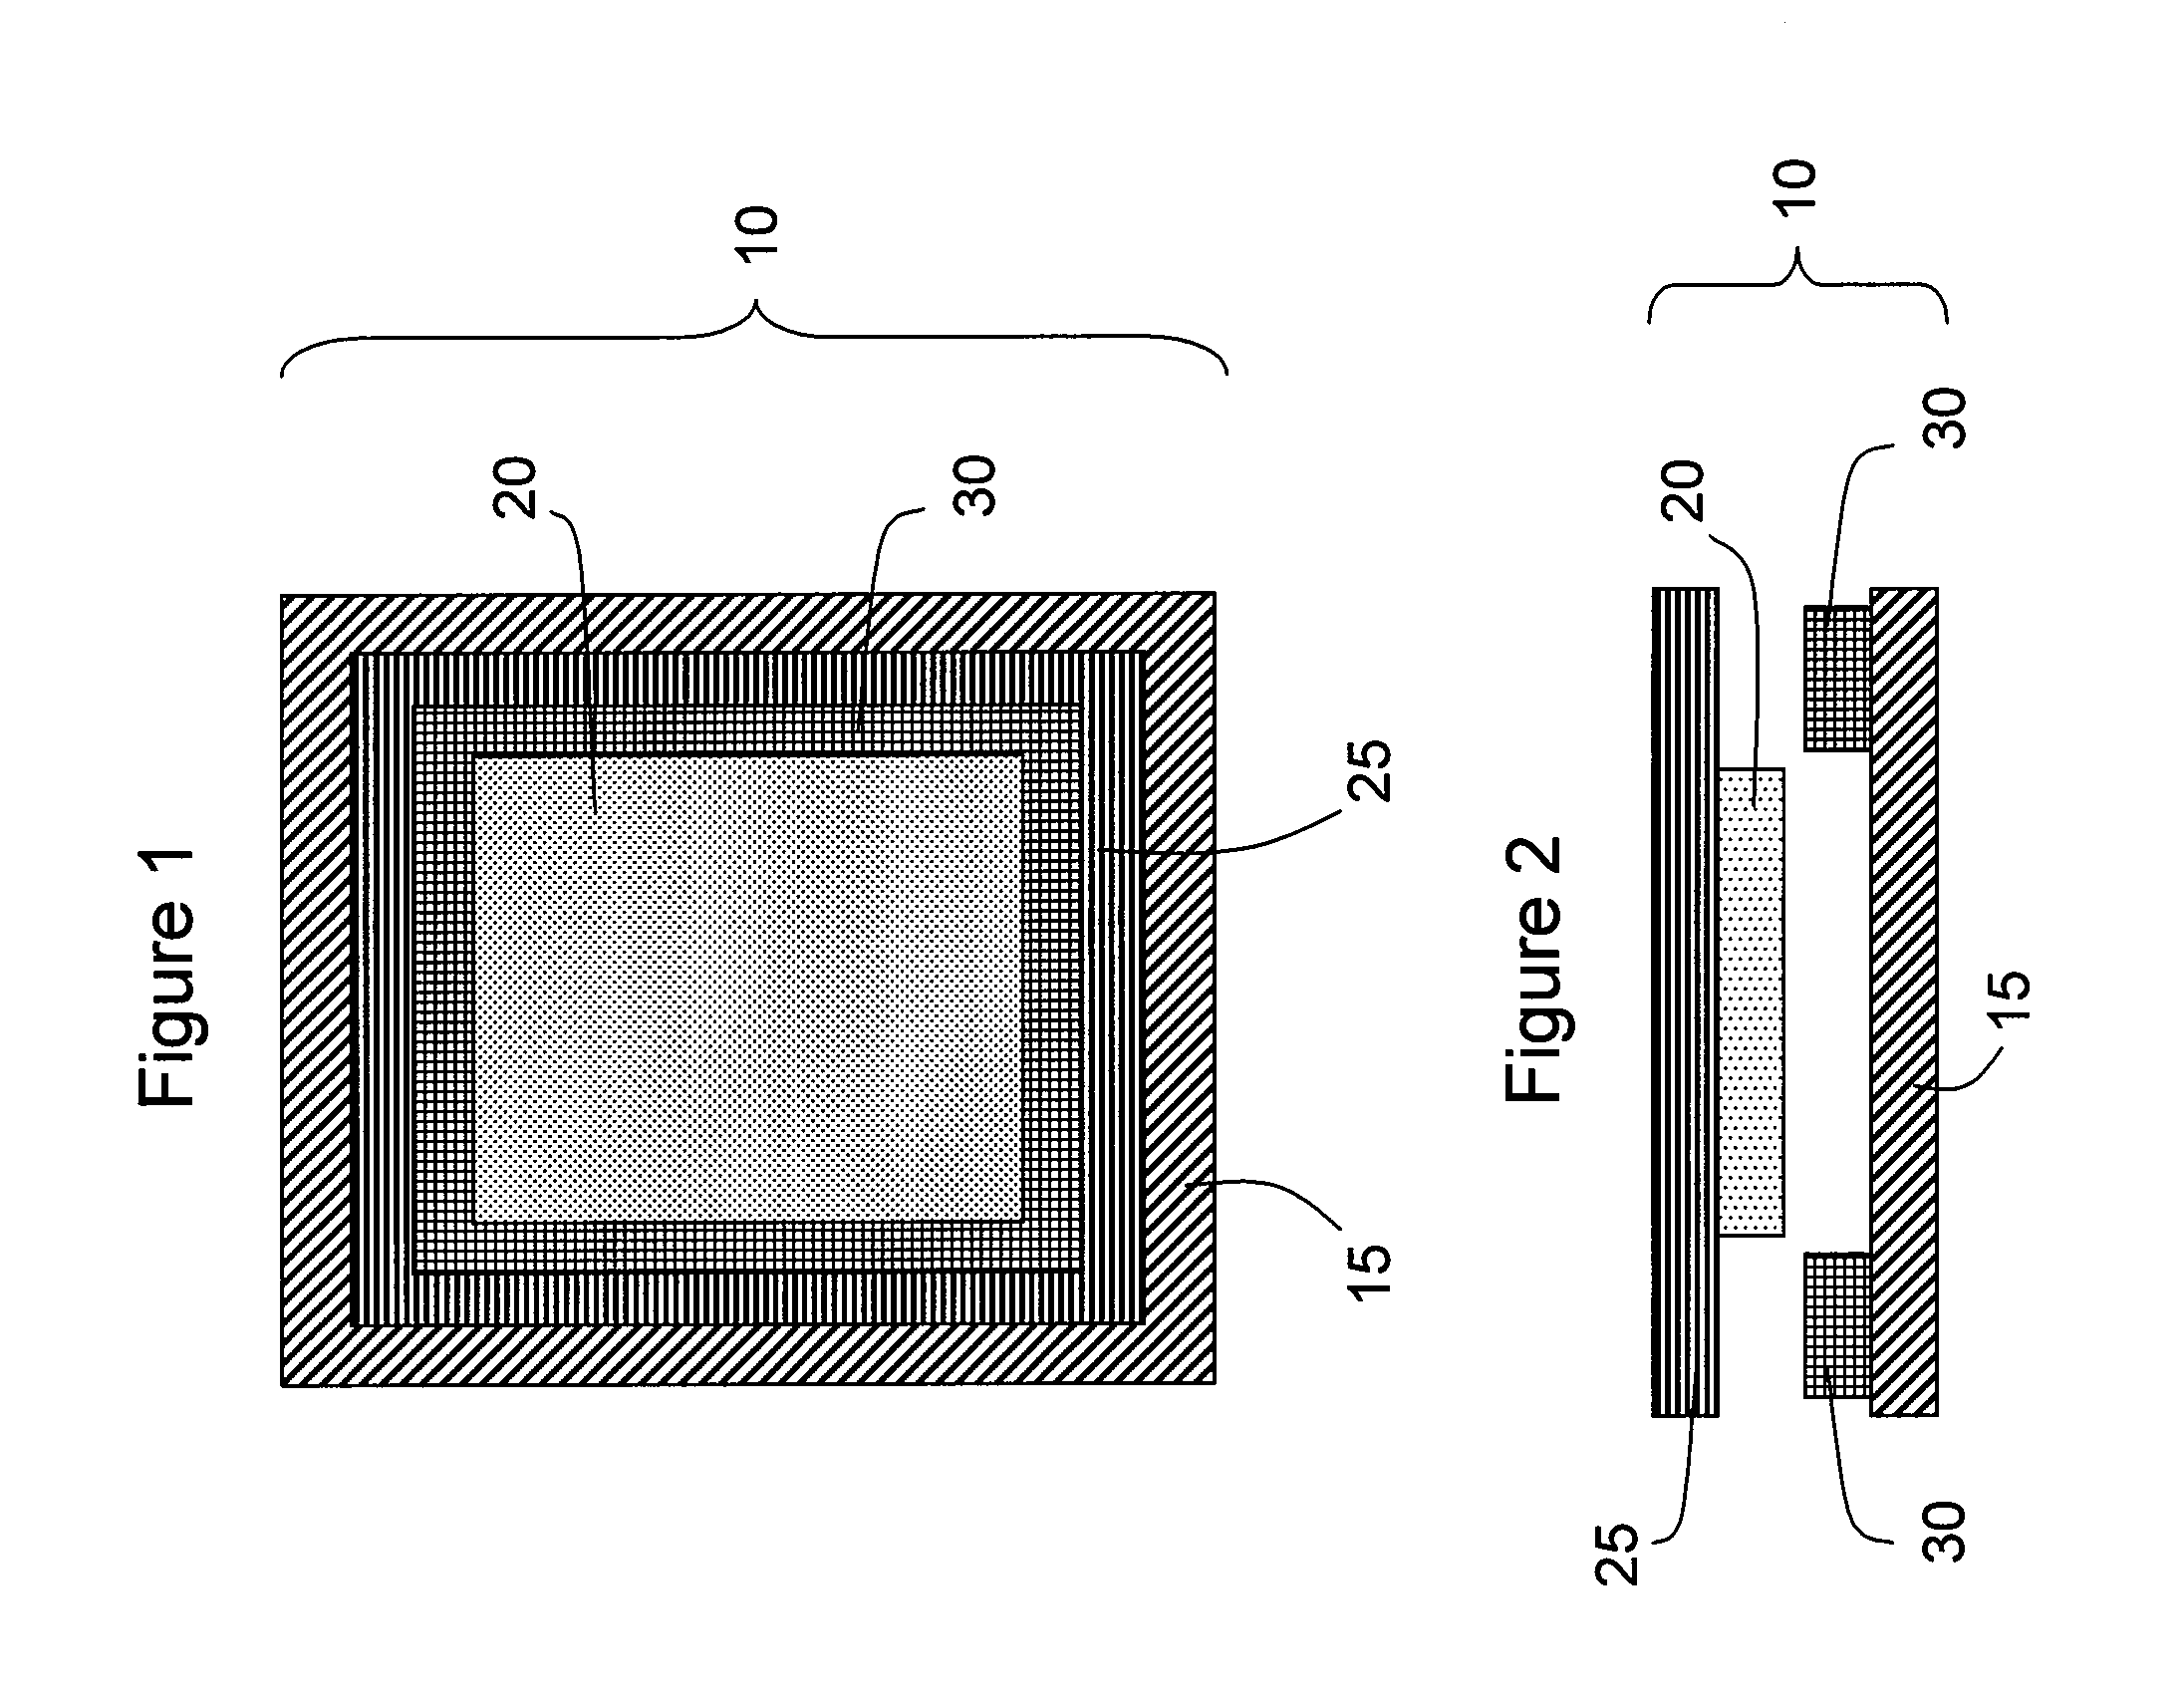 Attachment system of photovoltaic cells to fluoropolymer structural membrane